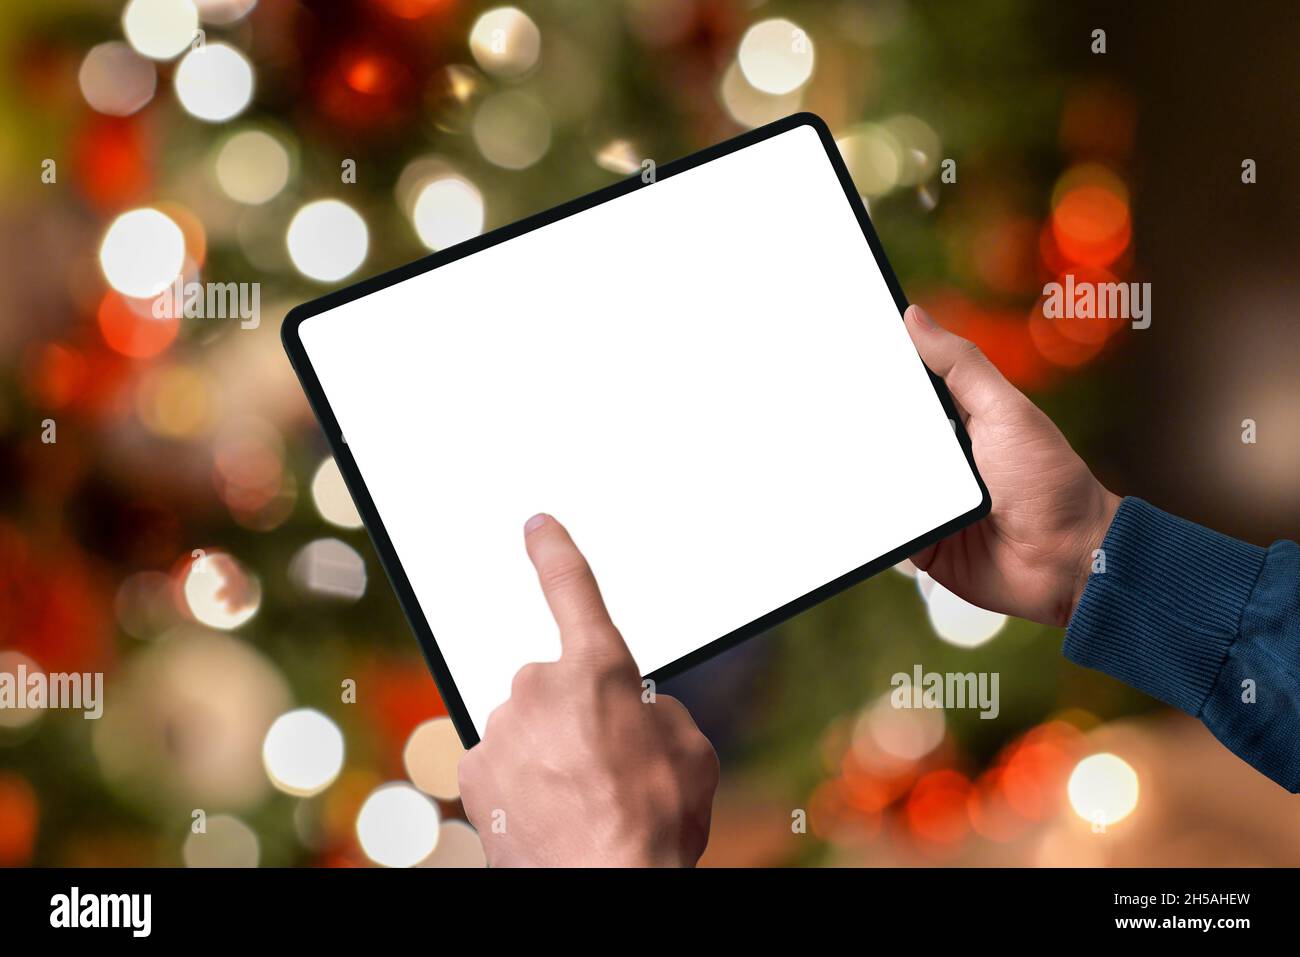 Tablet in the hands with the lights of the Christmas tree behind. Isolated display for design promotion. Season online shopping concept Stock Photo